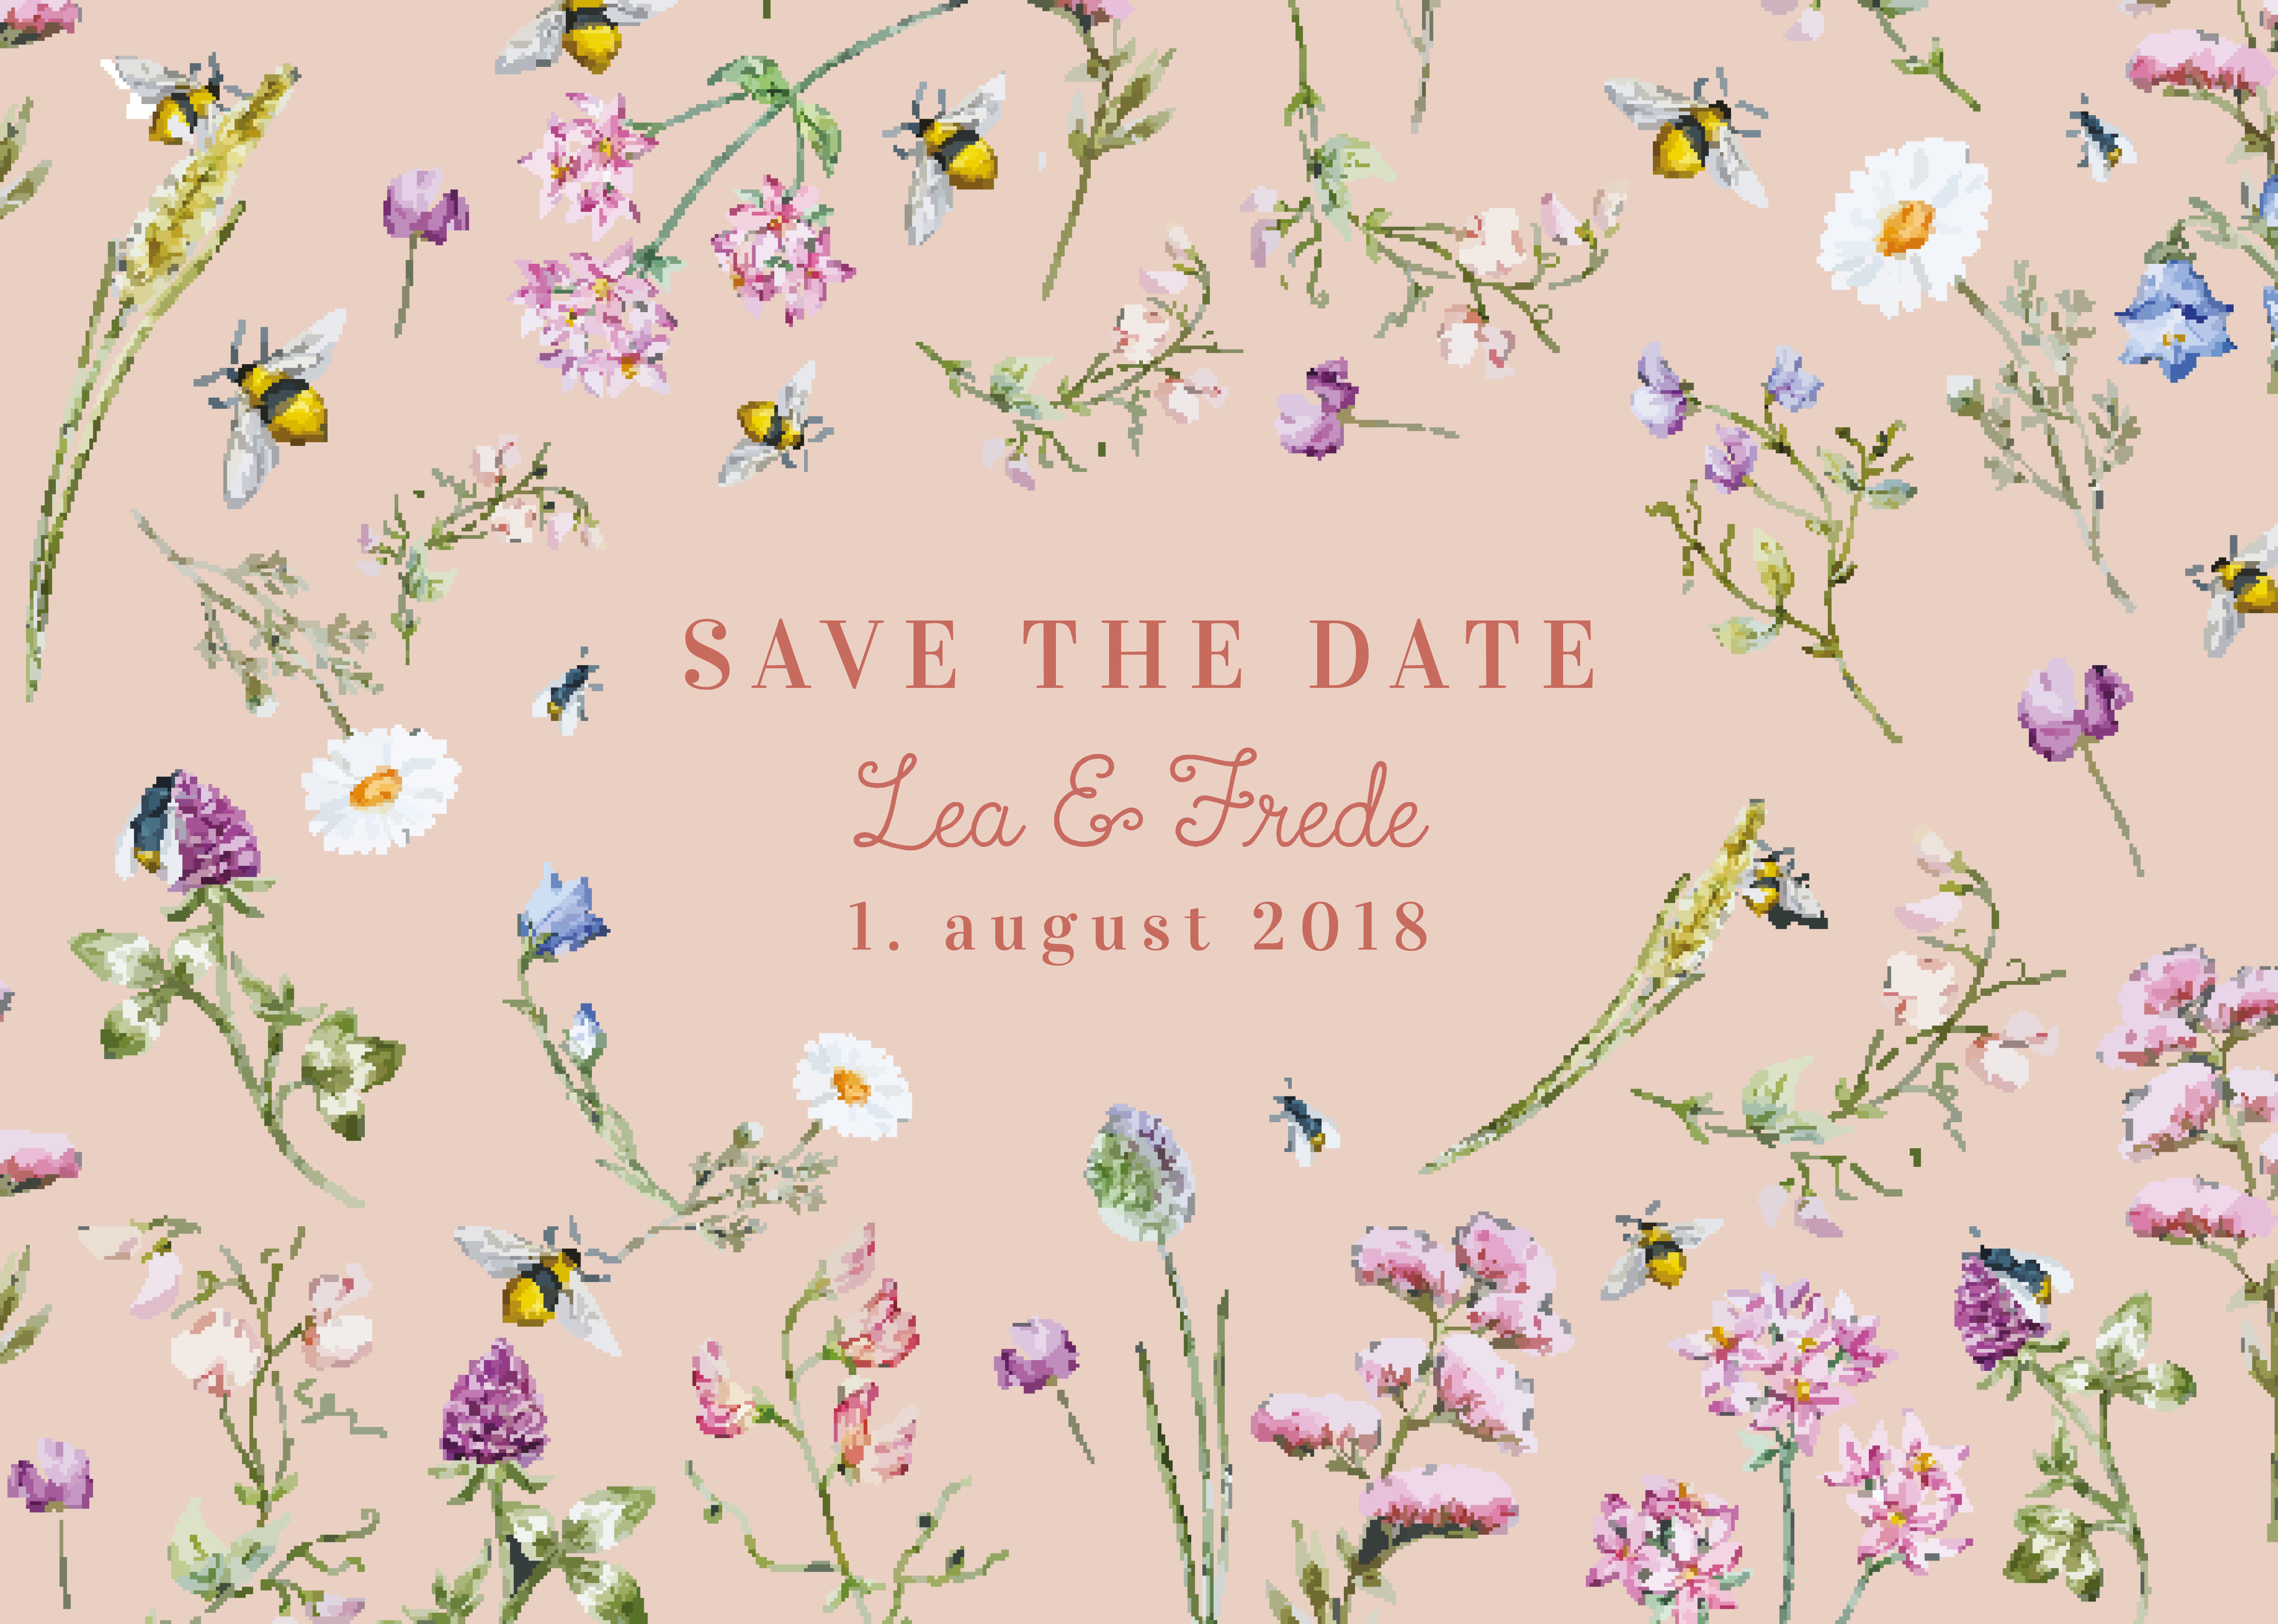 Save the date - Lea & Frede Rosa